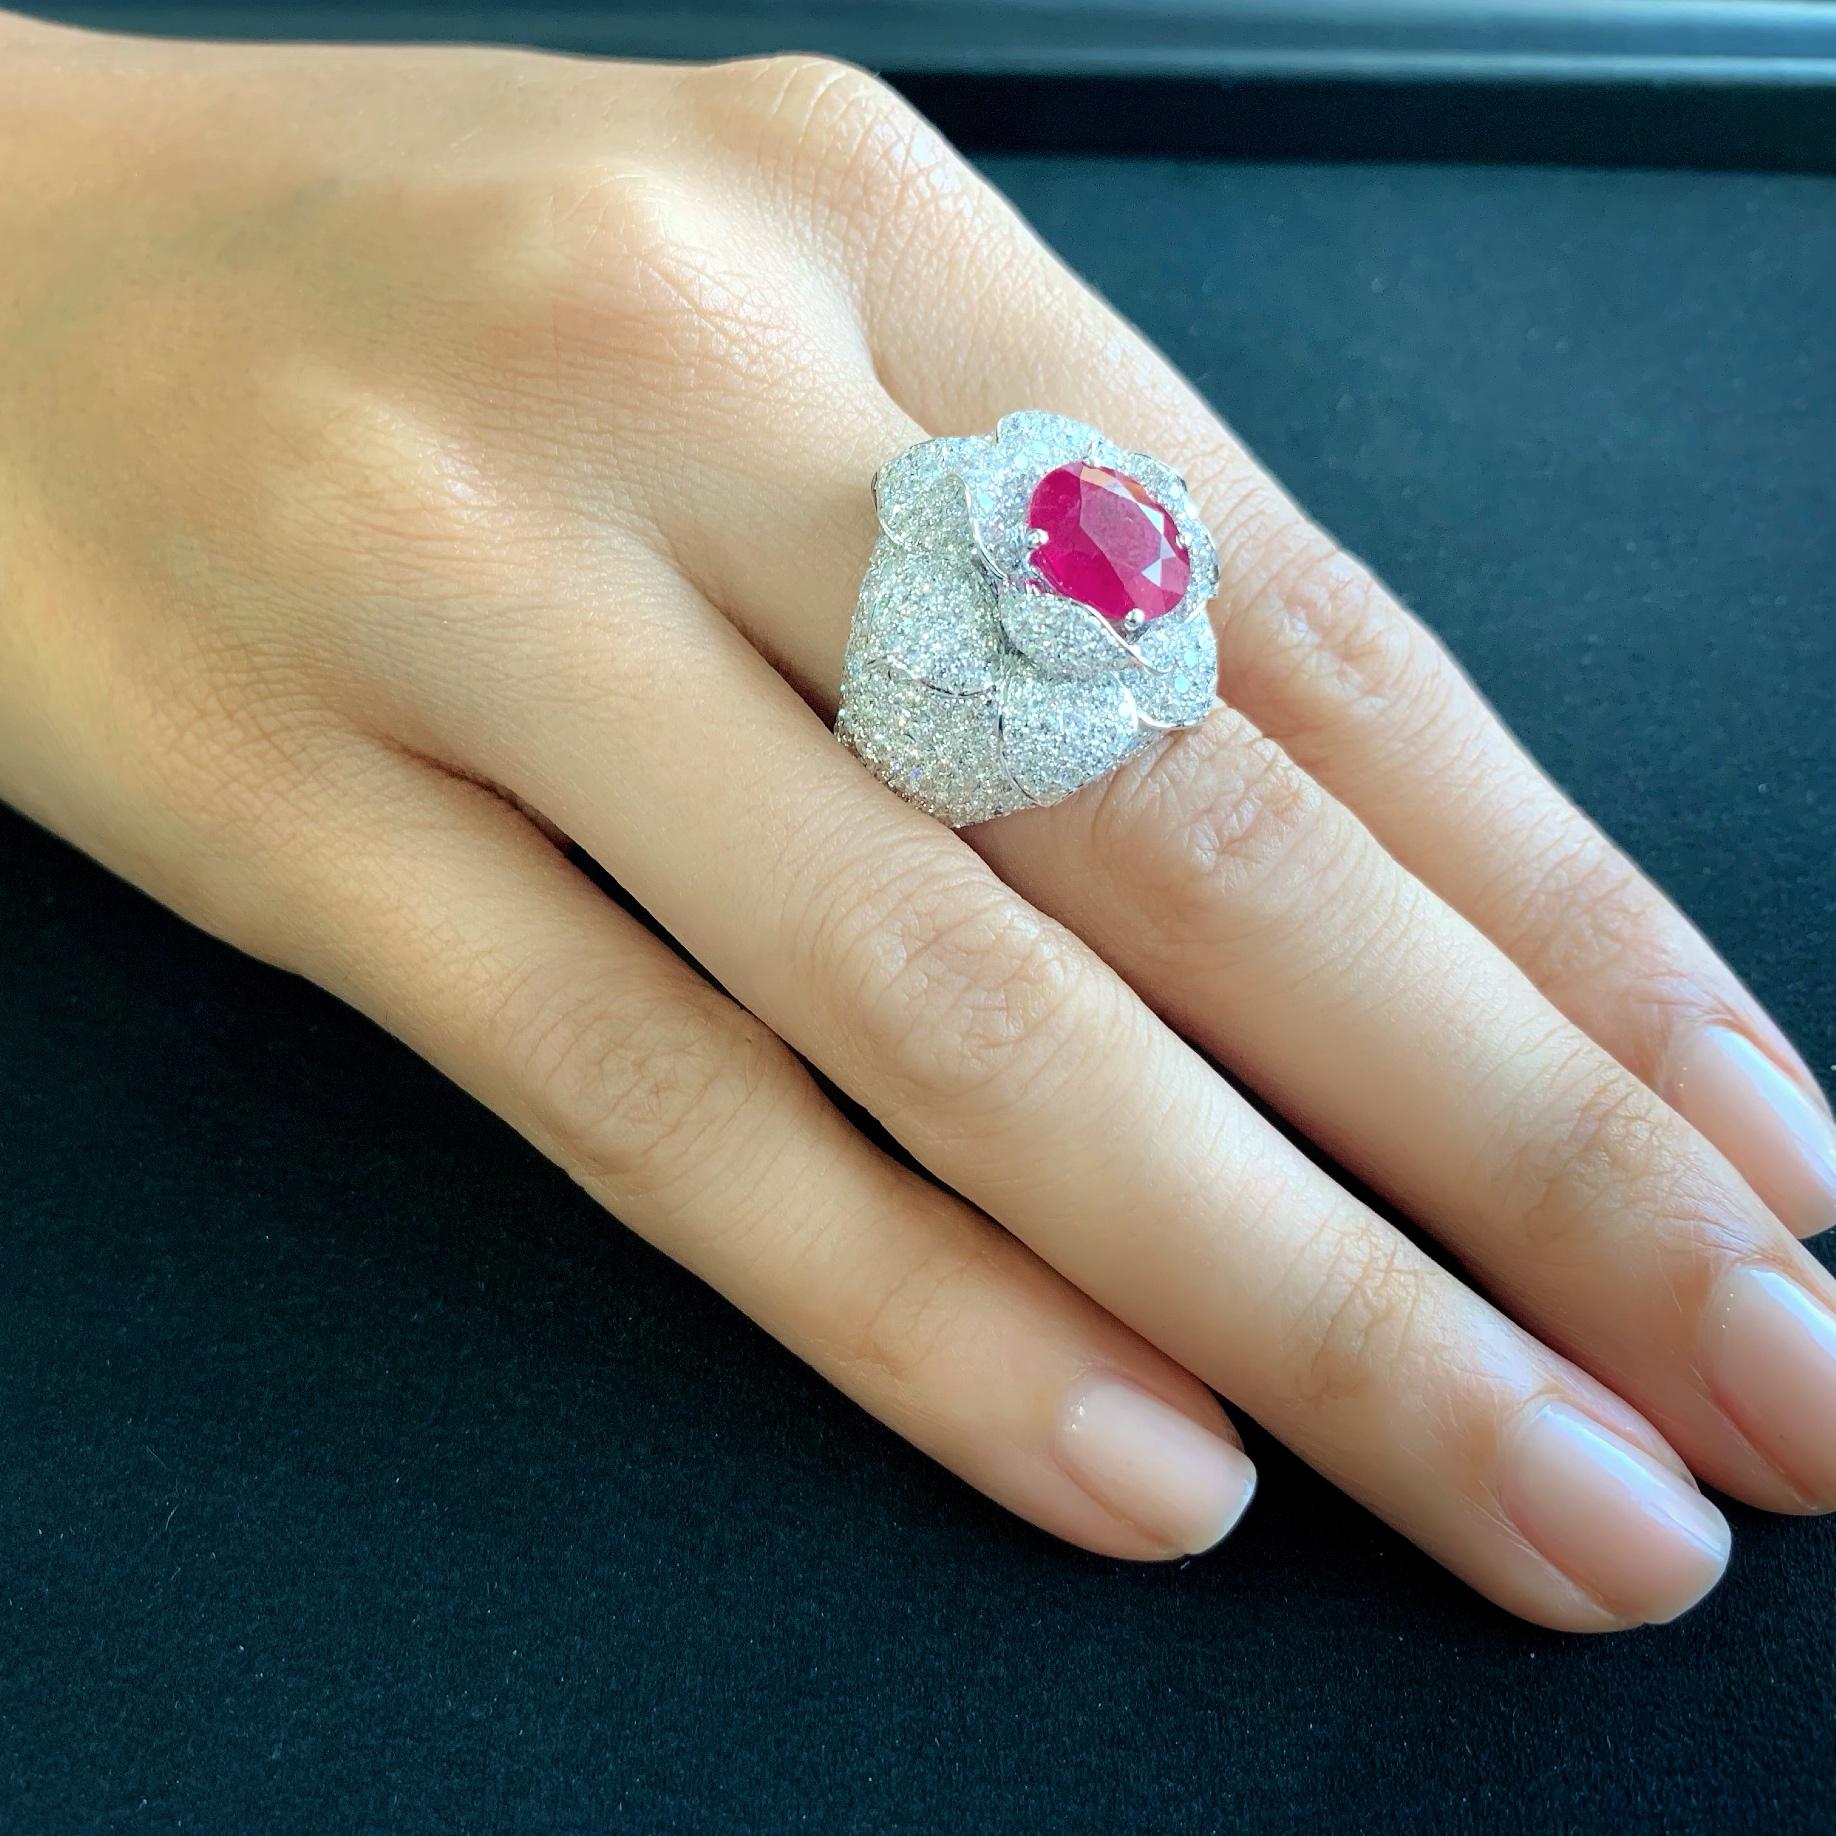 Butani's glamorous ruby and diamond ring features a certified 3.71 carat vivid oval ruby center stone, surrounded by 5.1 carats of pave white diamonds in a floral setting.  Handcrafted in 18-karat white gold.  Currently a ring size US 7.  For other